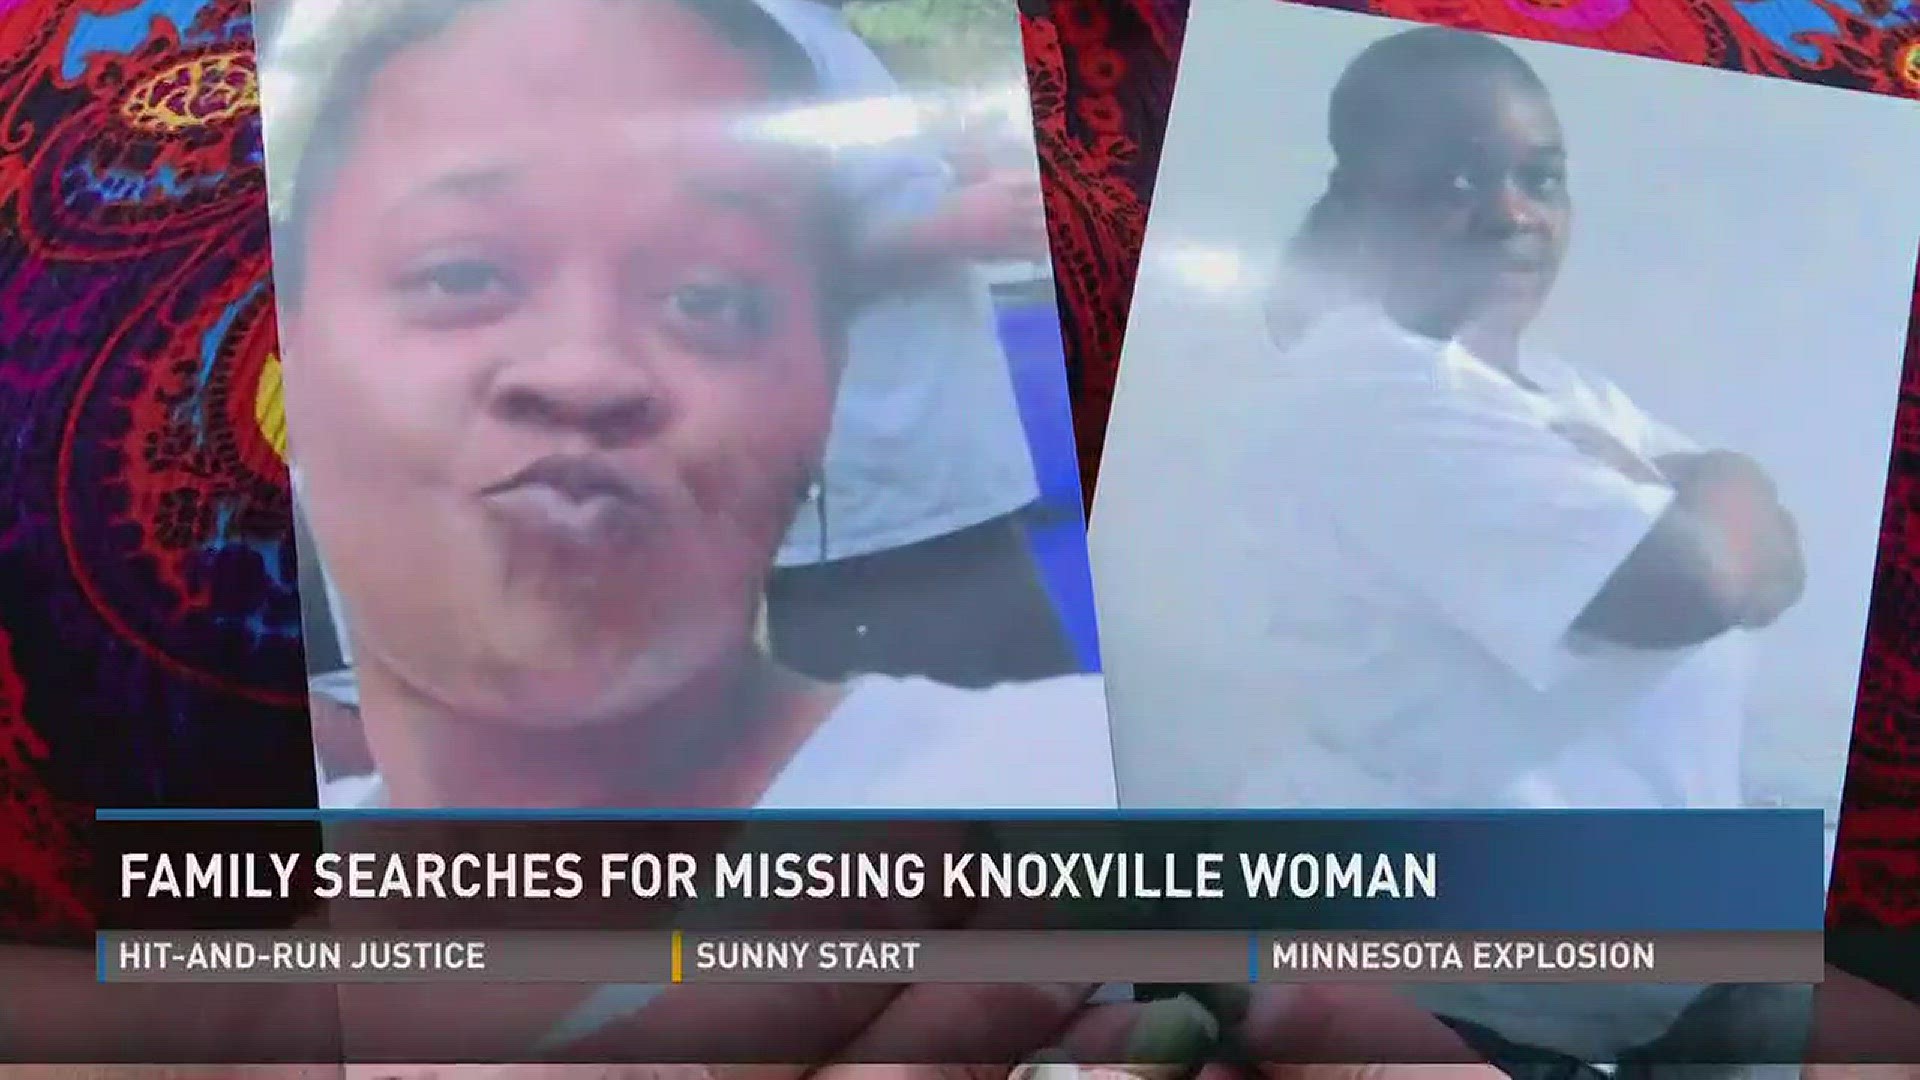 Nakisha Scott has been missing for more than two months. Her family is doing all they can to help find her, even consulting a psychic, who directed them to an area of West Knox County to search.